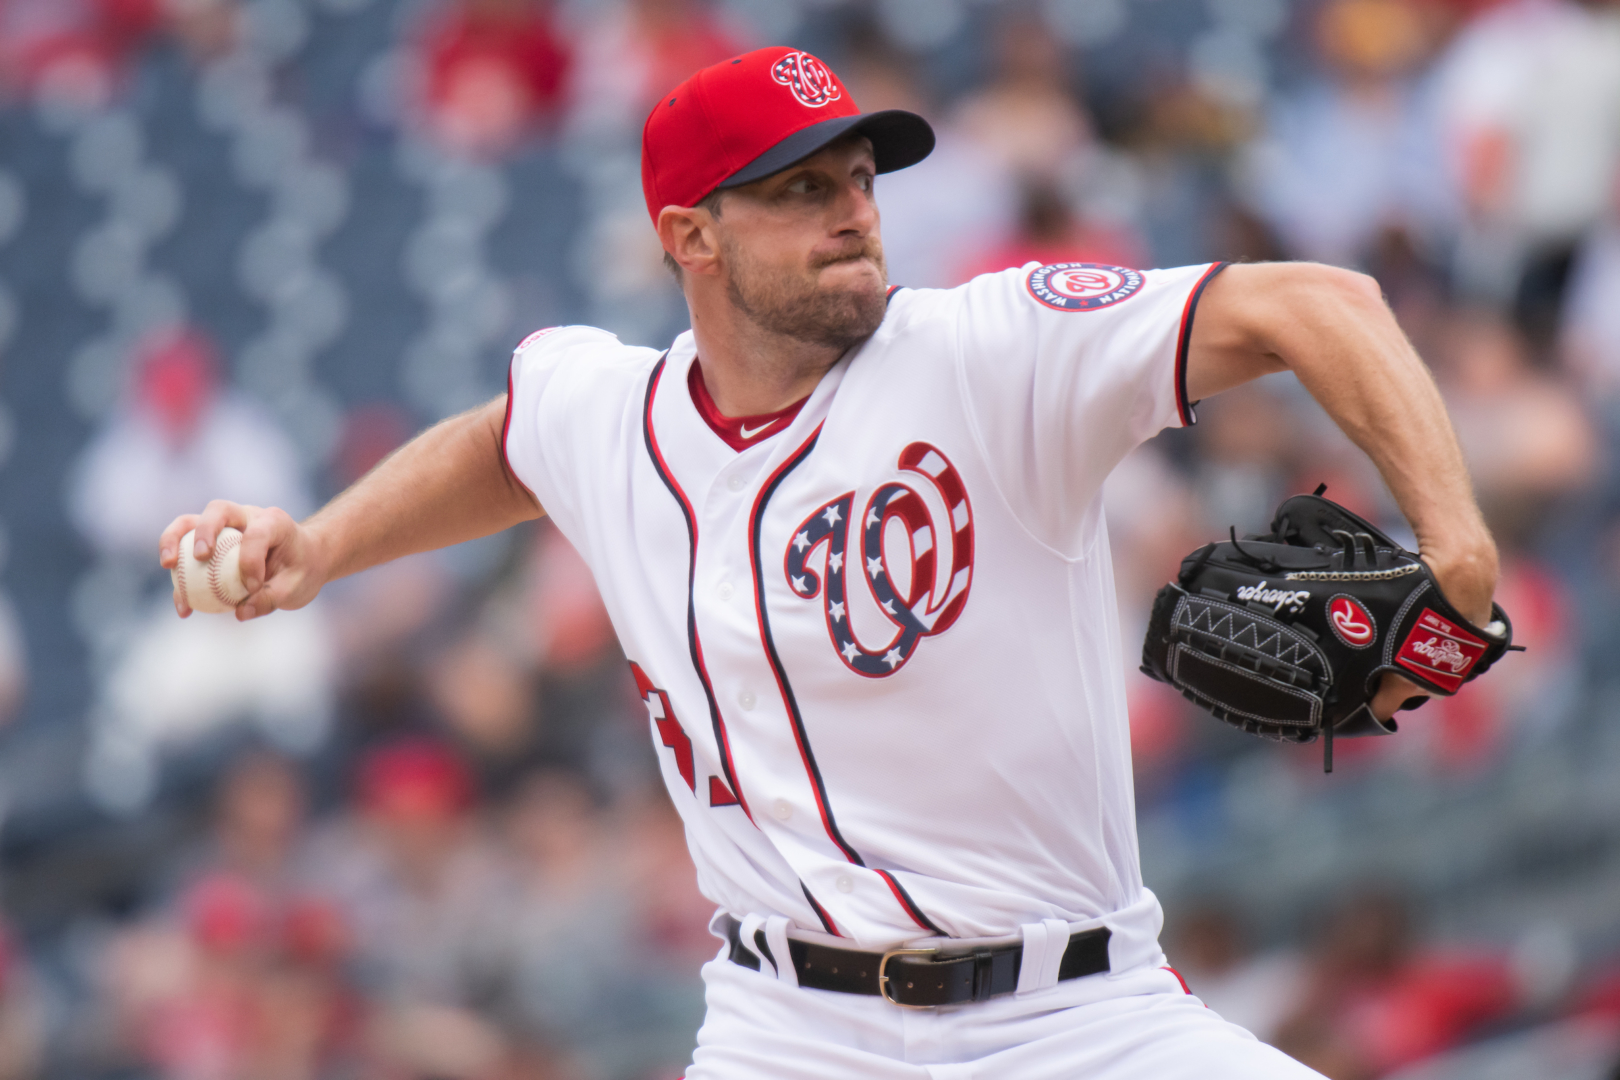 Max Scherzer, the Game 1 starter against the Astros, has been among the most elite pitchers in MLB, tallying a 2.92 ERA and 243 strikeouts in his 27 starts in 2019. | Courtesy of the Washington Nationals Baseball Club